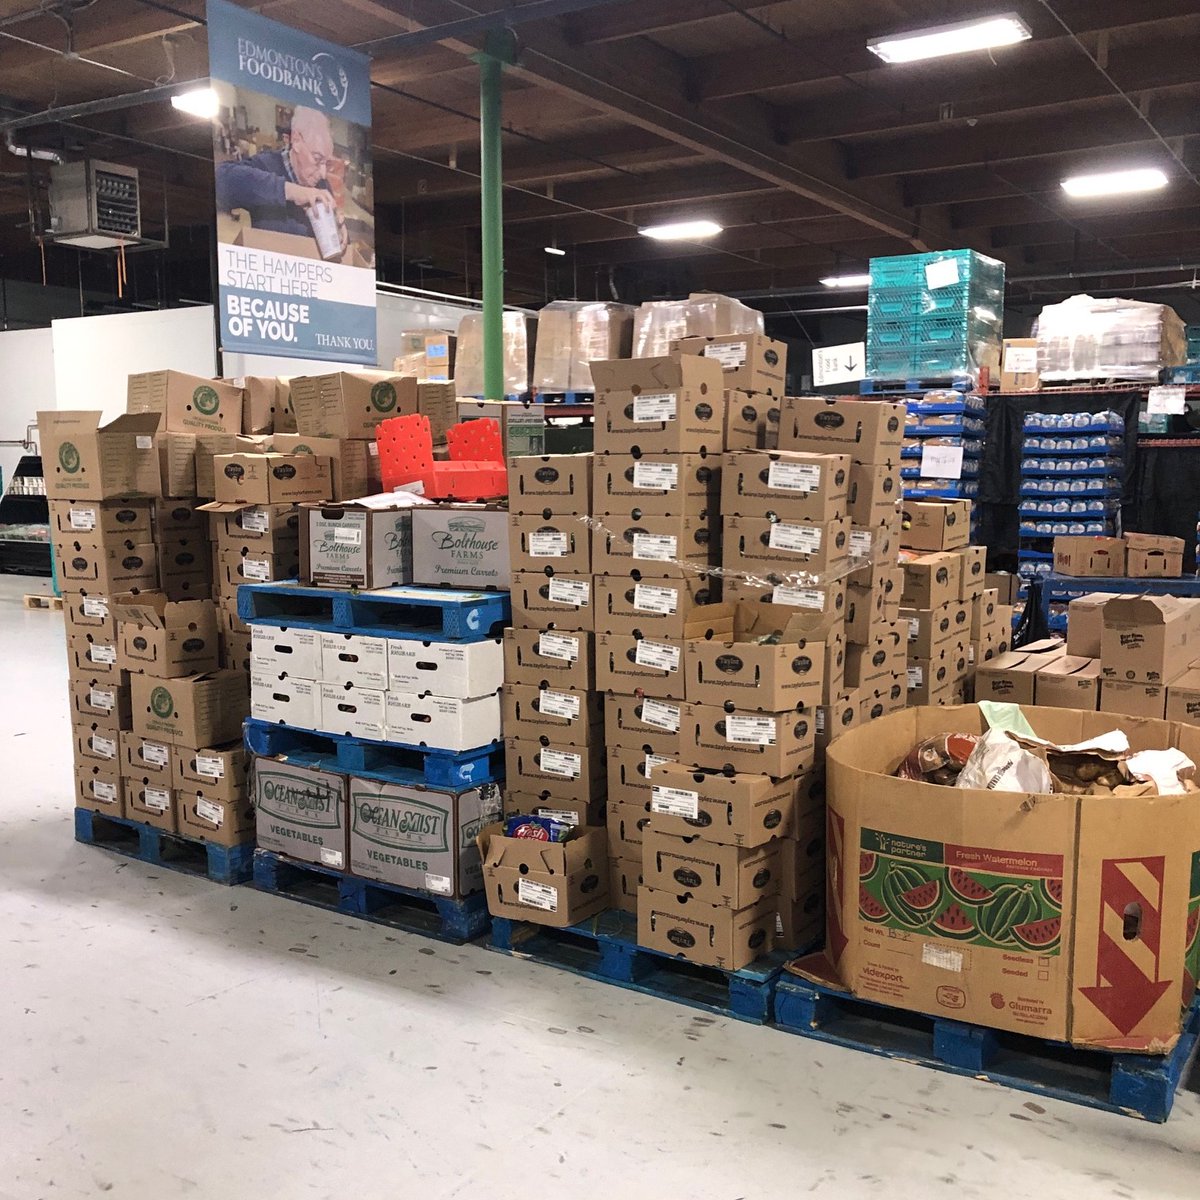 We use CHEP pallets on a daily basis. Pallets are an absolute necessity to keep everything moving smoothly while feeding our community. Our friends at @CHEPna provide pallets to us which reduces our expenses. Thank YOU for helping us do our work. #yeg #edmonton #yegfoodbank